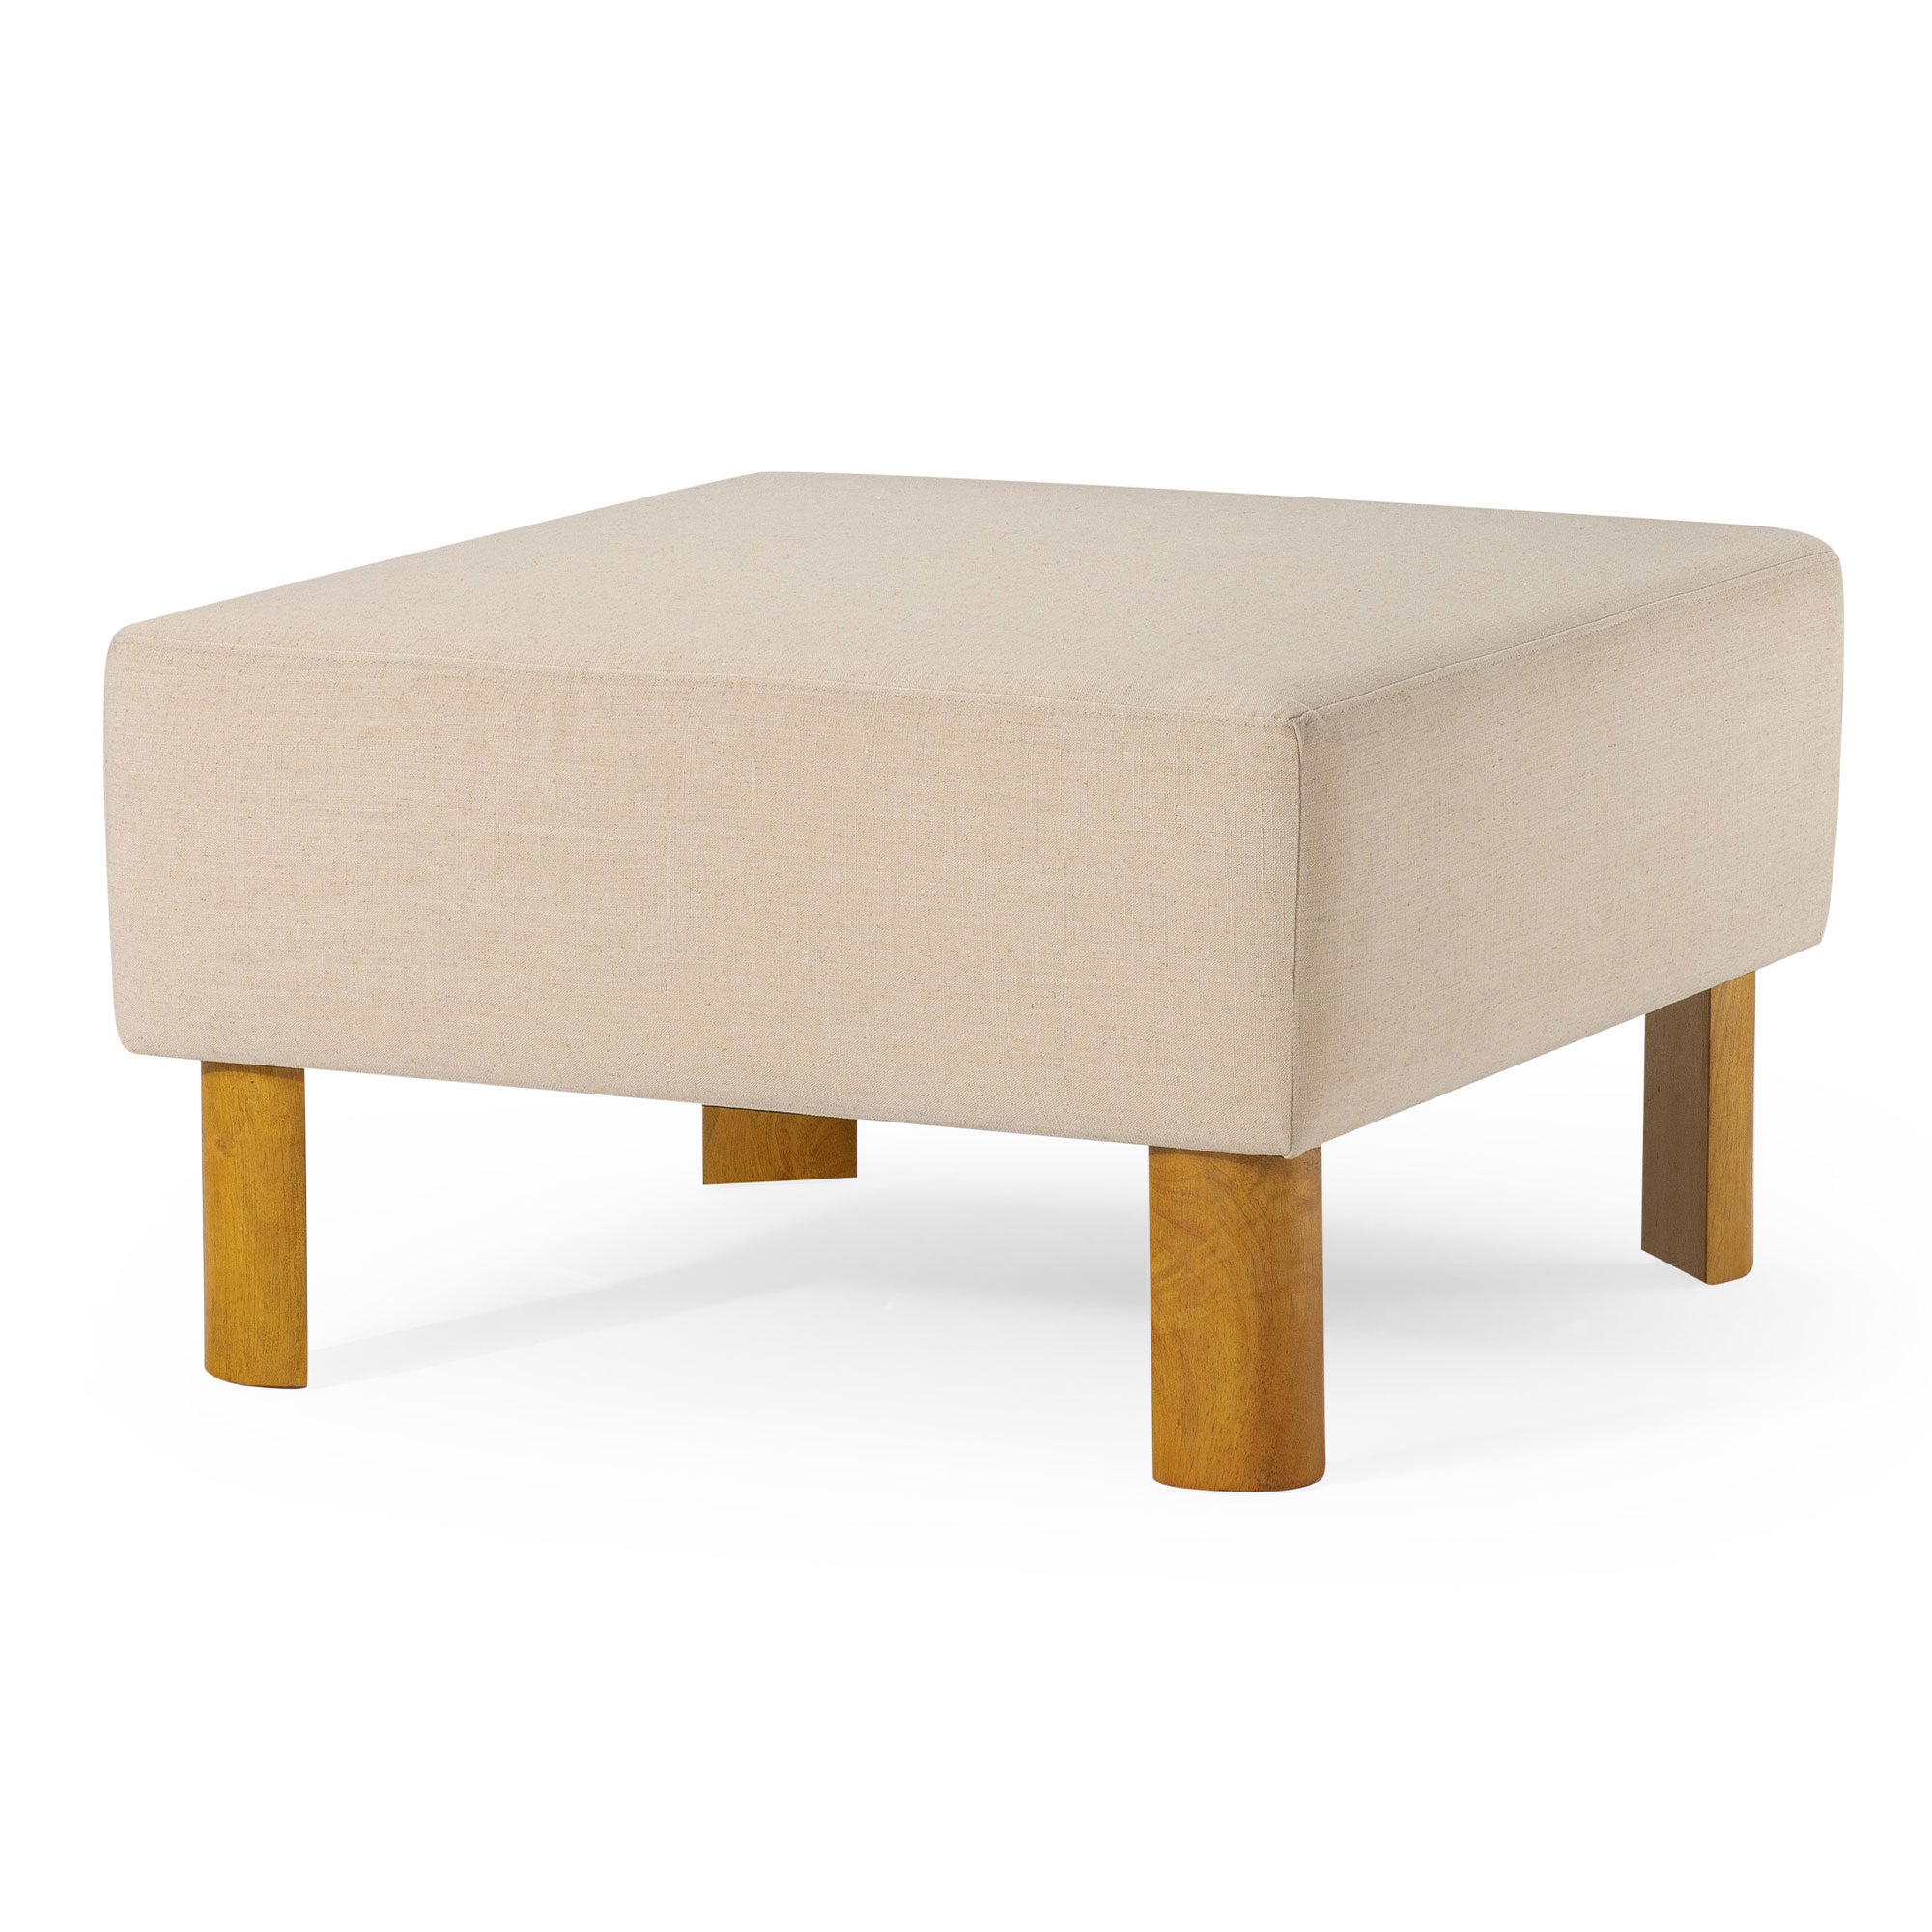 Lena Contemporary Upholstered Ottoman with Refined Natural Wood Finish in Ottomans & Benches by Maven Lane